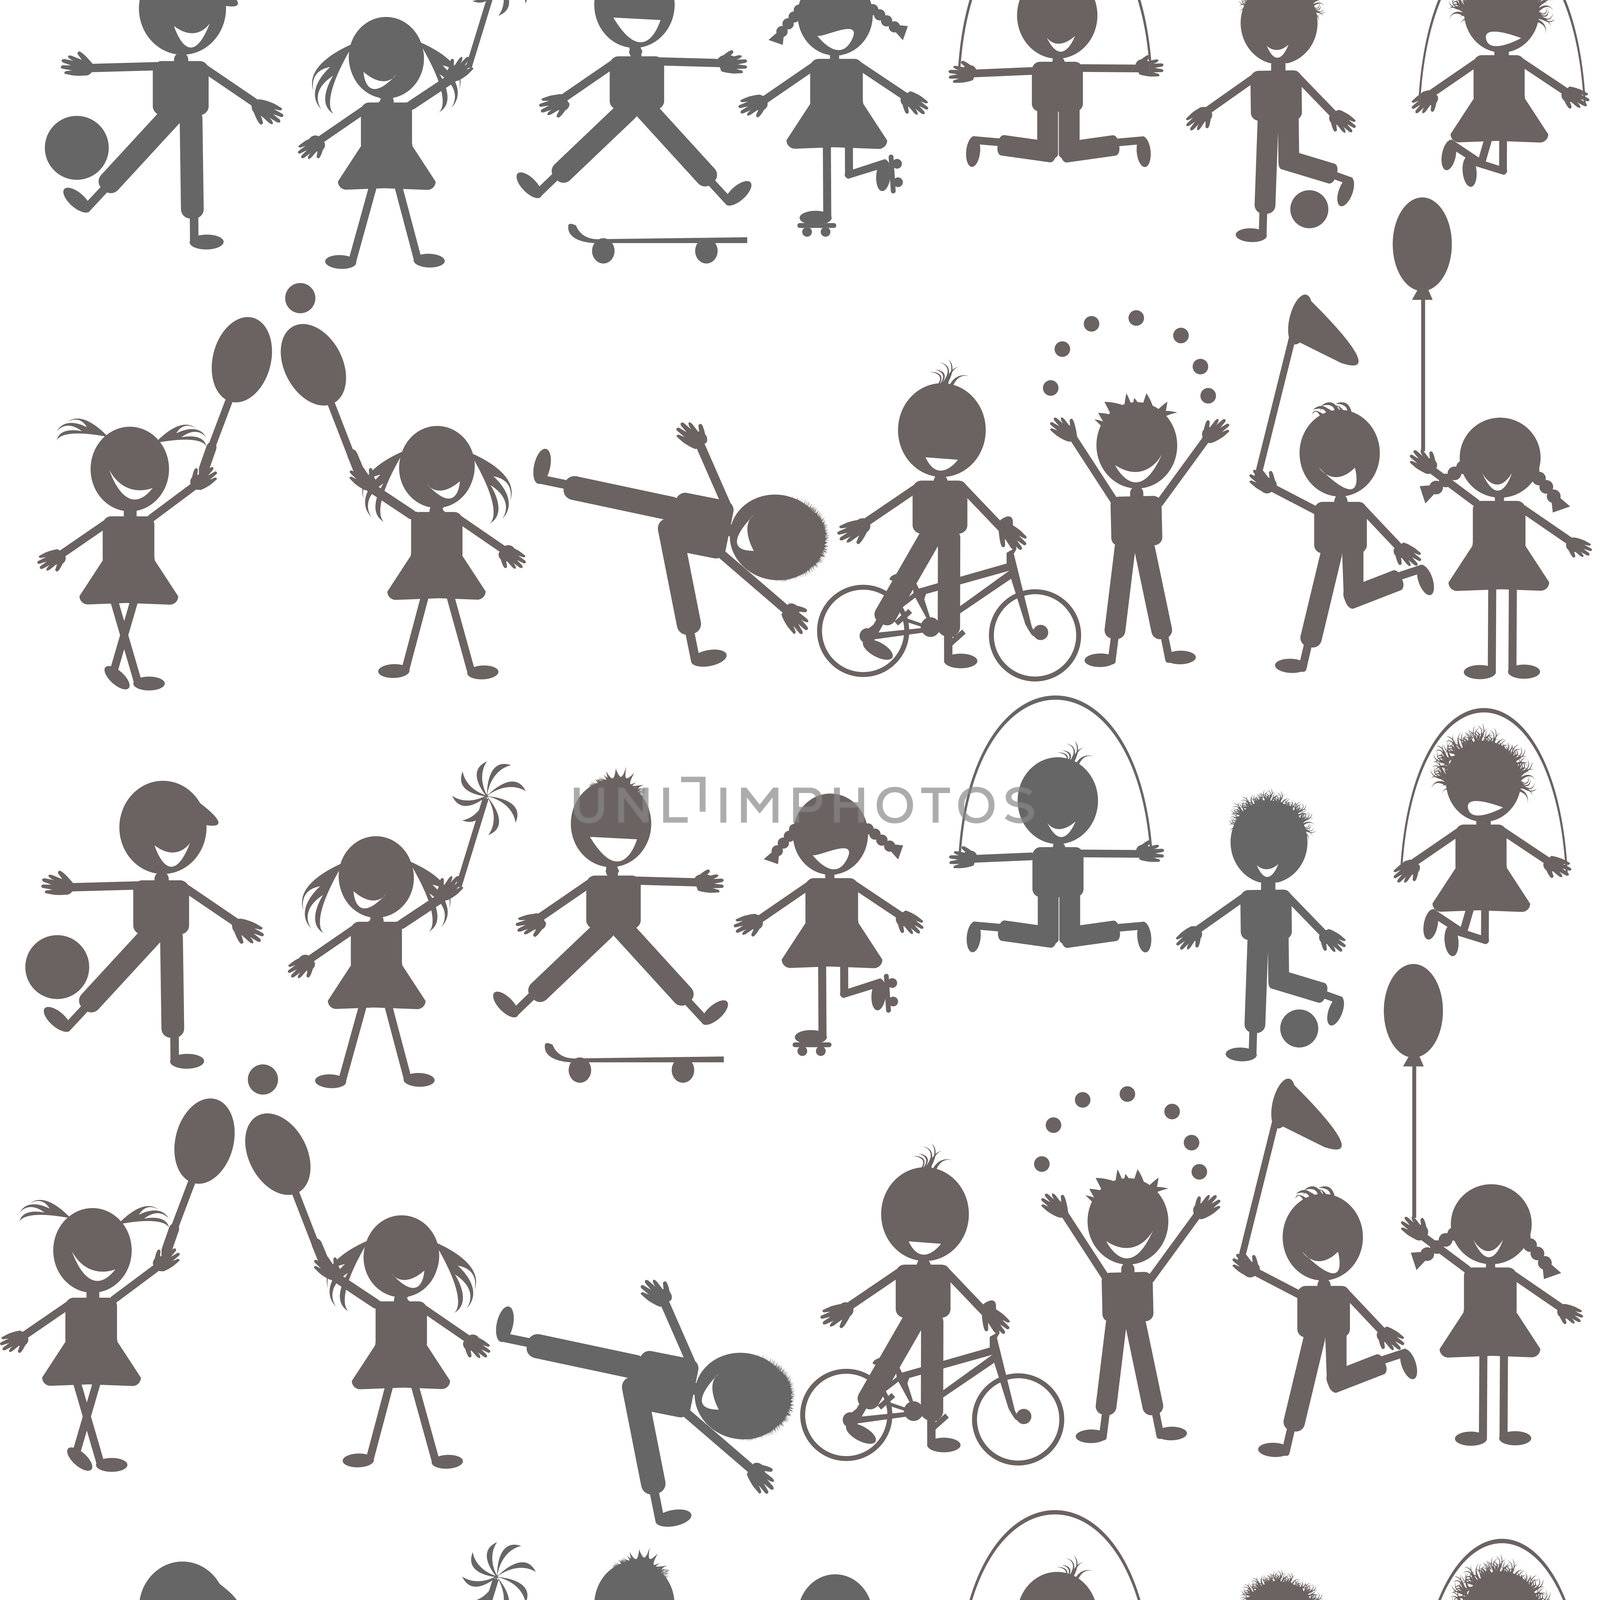 Set of children playing silhouettes by hibrida13